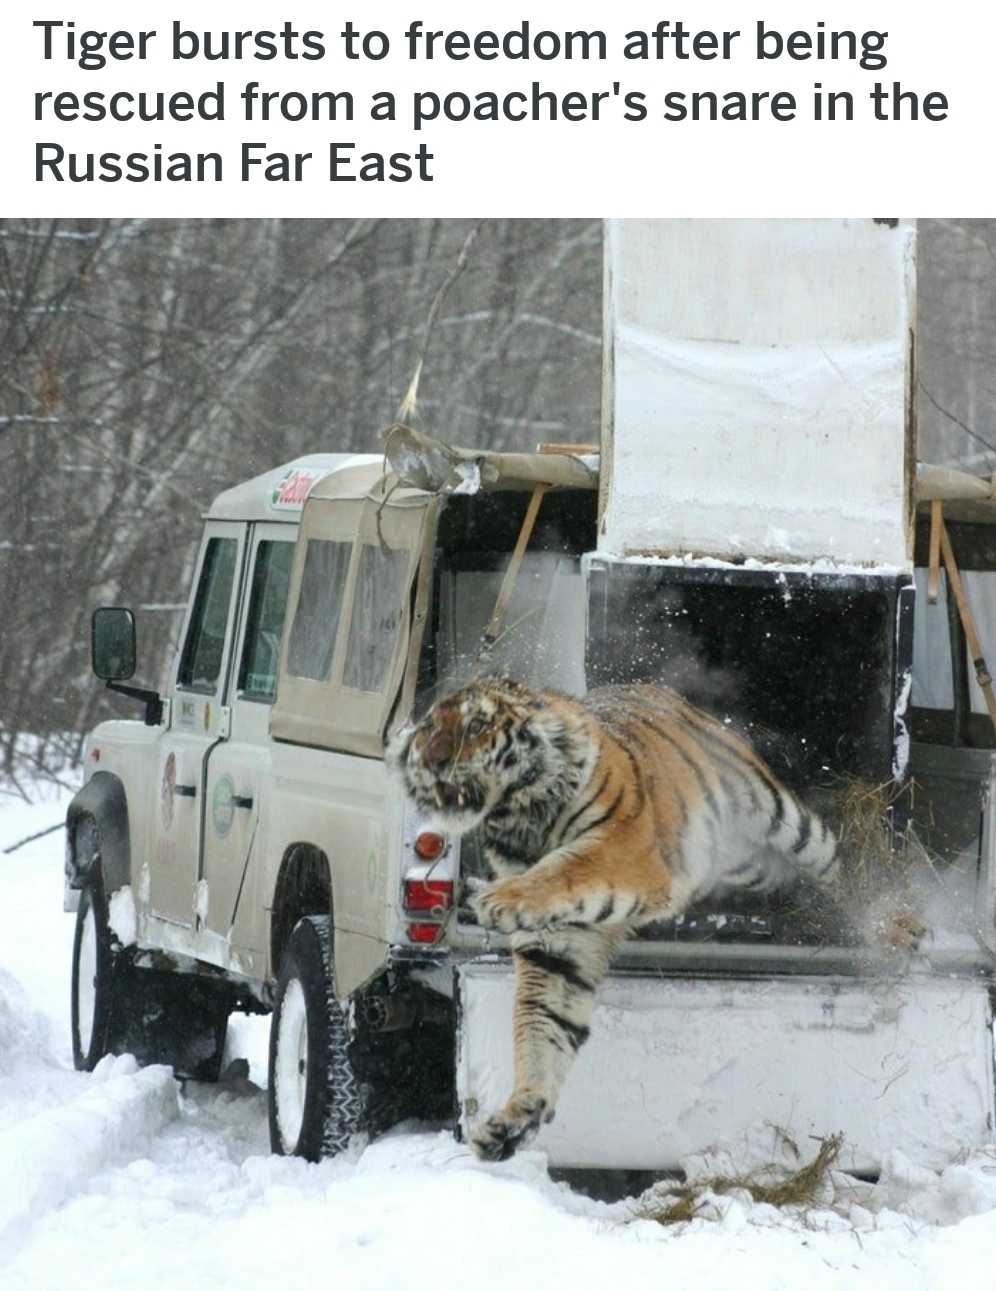 memes - amur tiger - Tiger bursts to freedom after being rescued from a poacher's snare in the Russian Far East